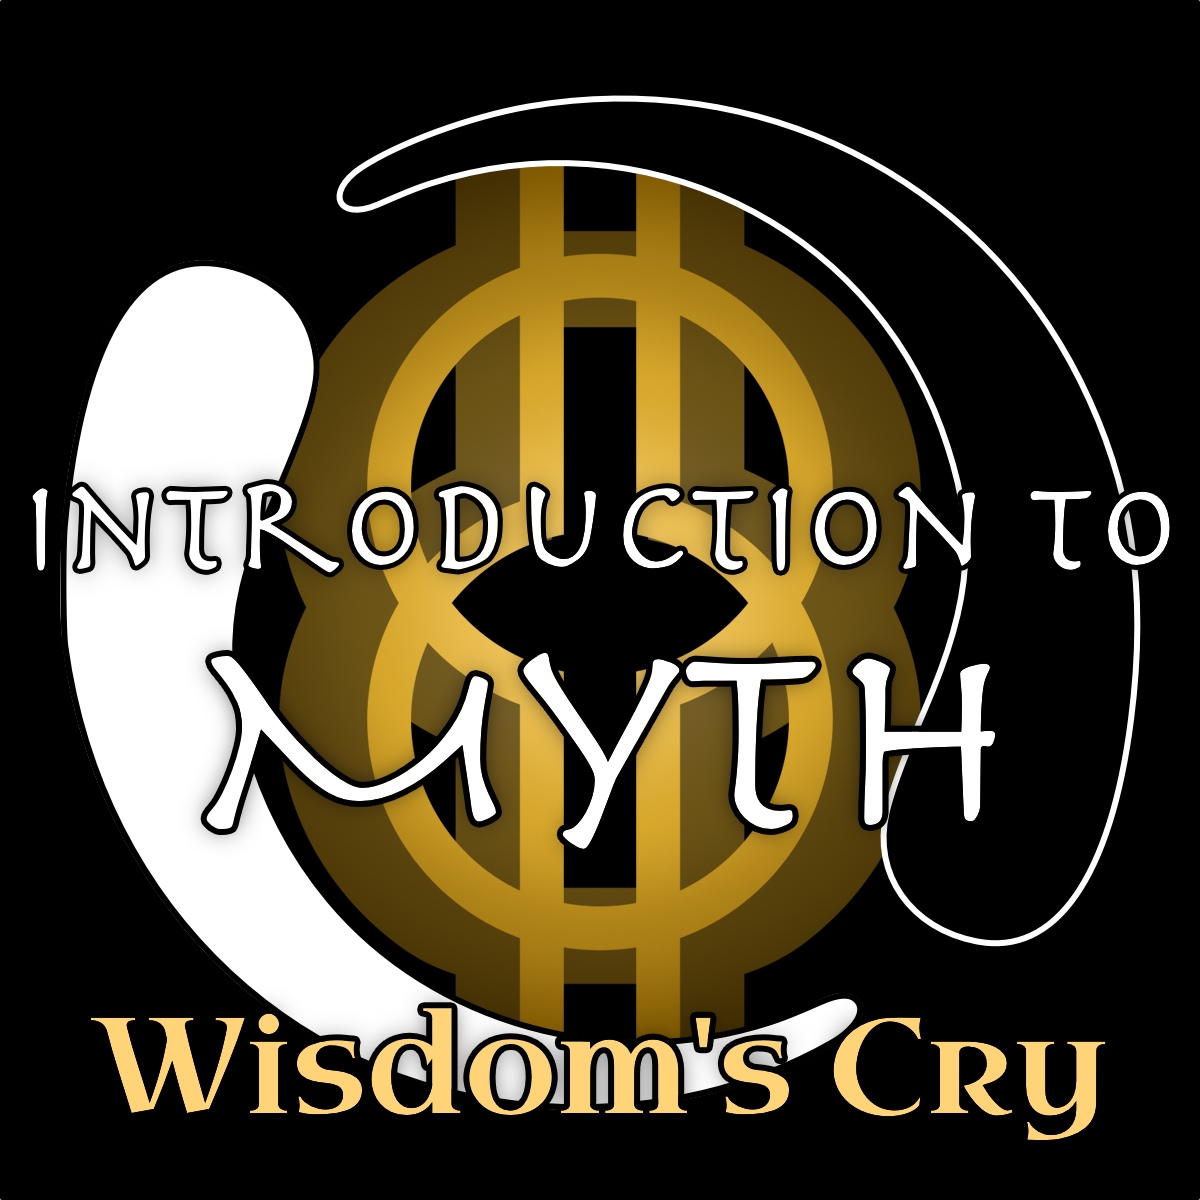 18- Cosmological Function of Myth